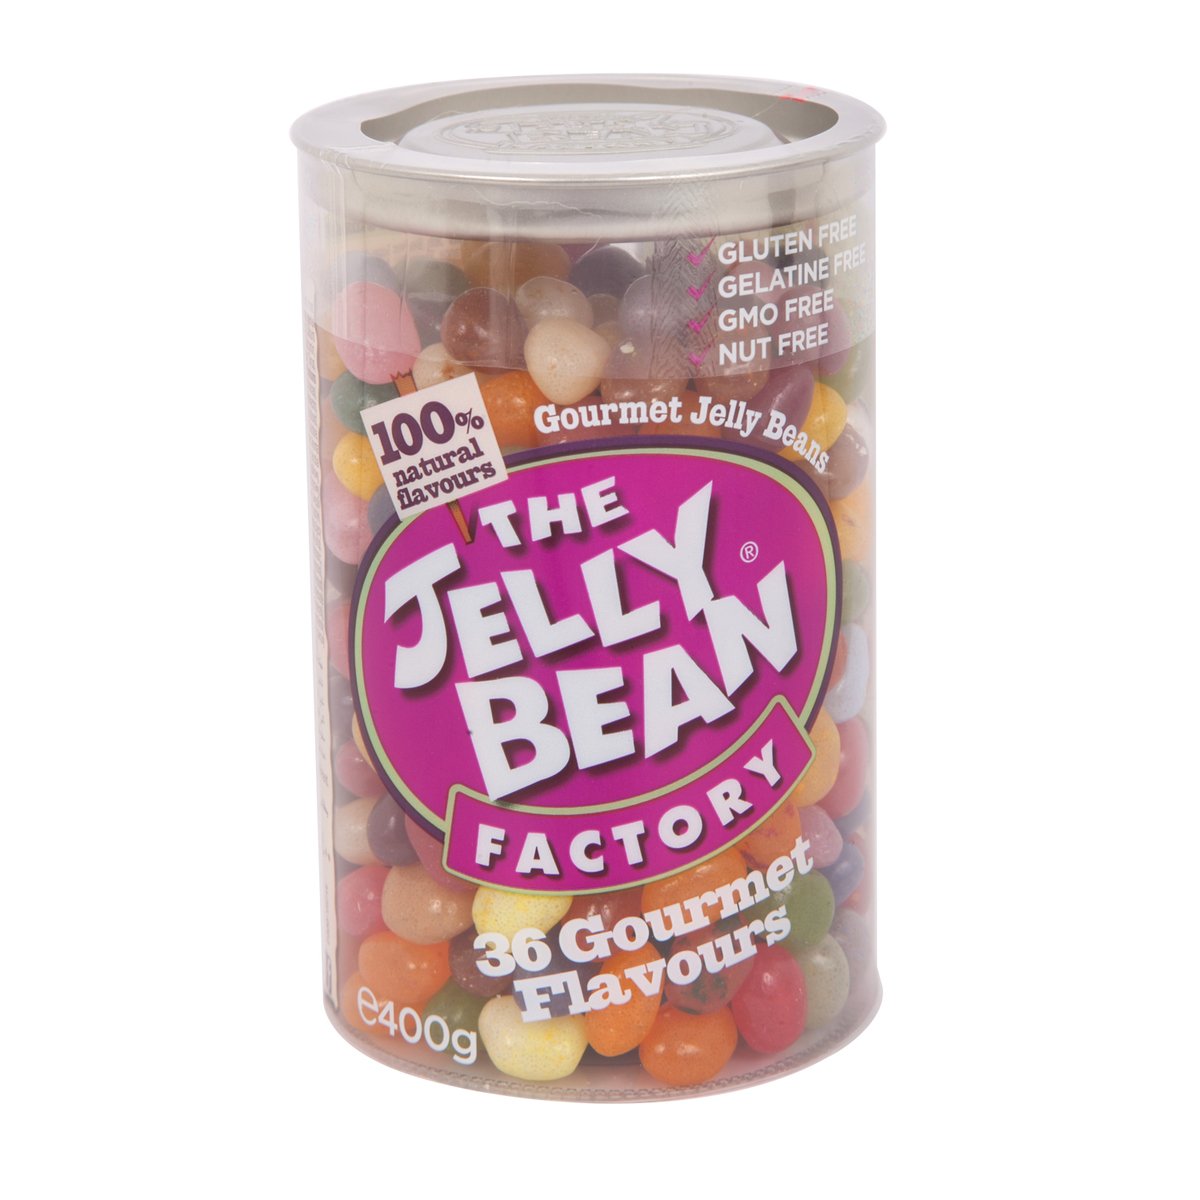 The Jelly Bean Factory 36 Gourmet Flavours 400 g